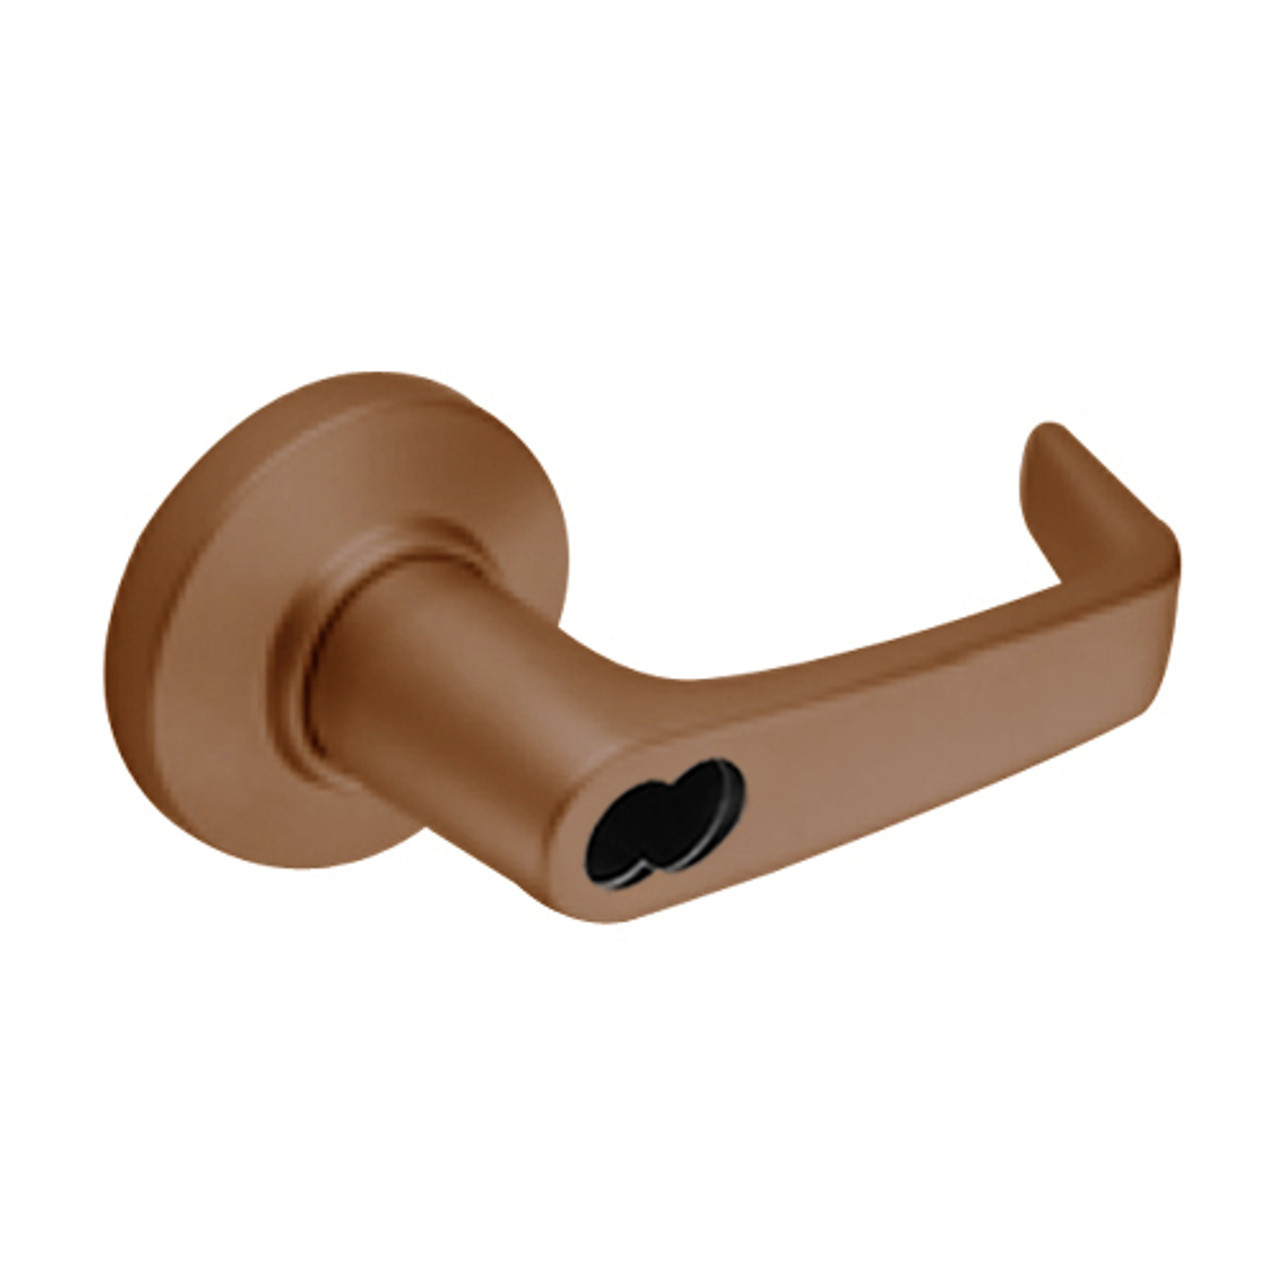 9K37A15CS3690LM Best 9K Series Dormitory or Storeroom Cylindrical Lever Locks with Contour Angle with Return Lever Design Accept 7 Pin Best Core in Dark Bronze